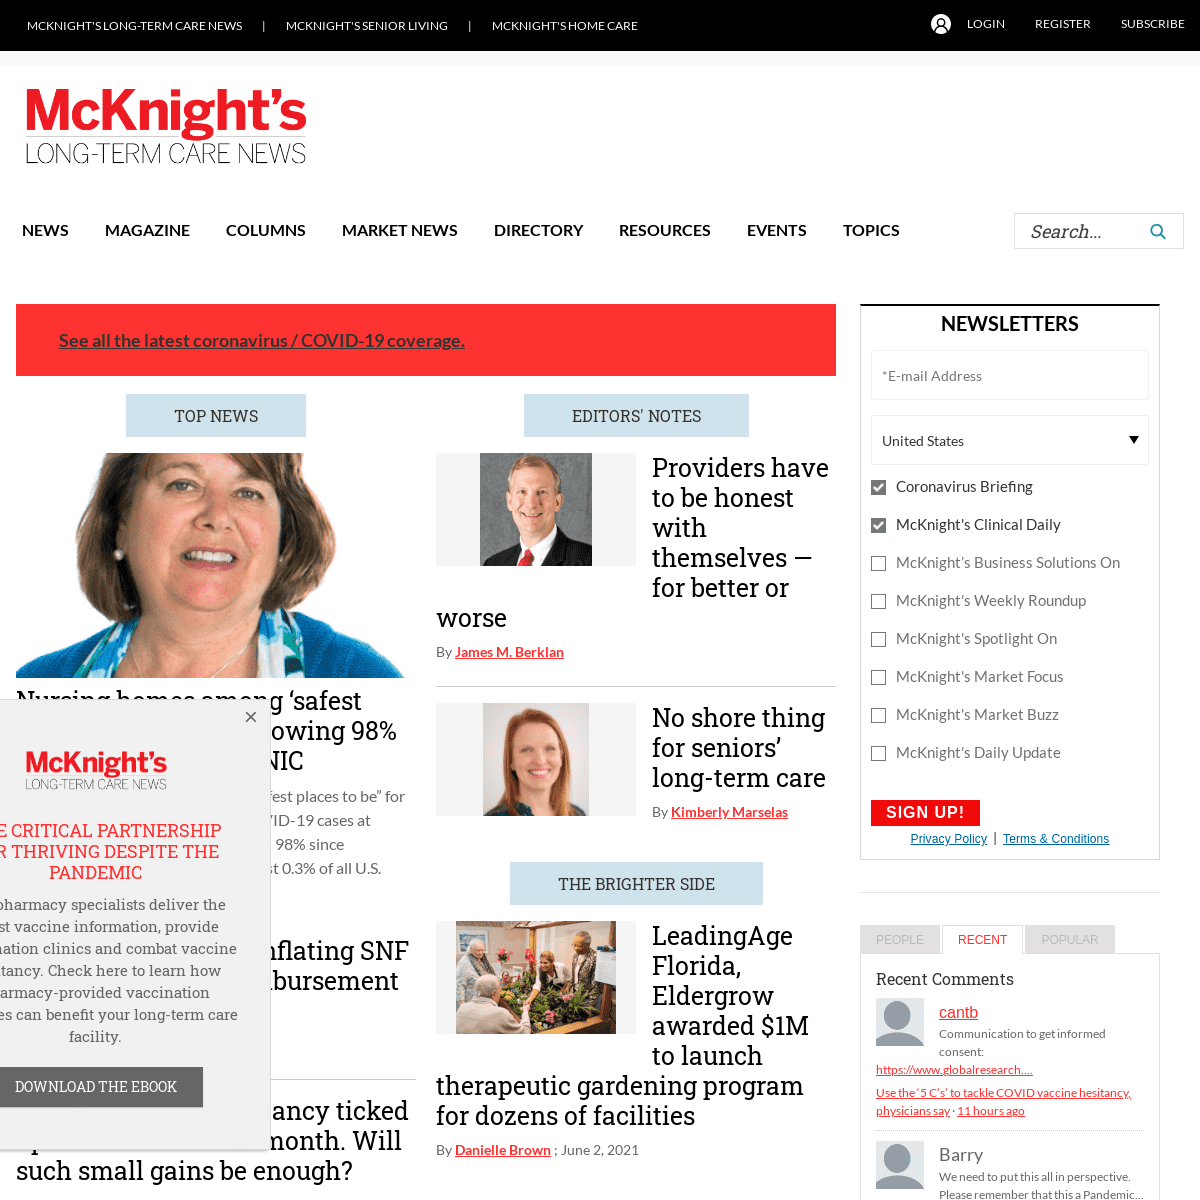 A complete backup of https://mcknights.com